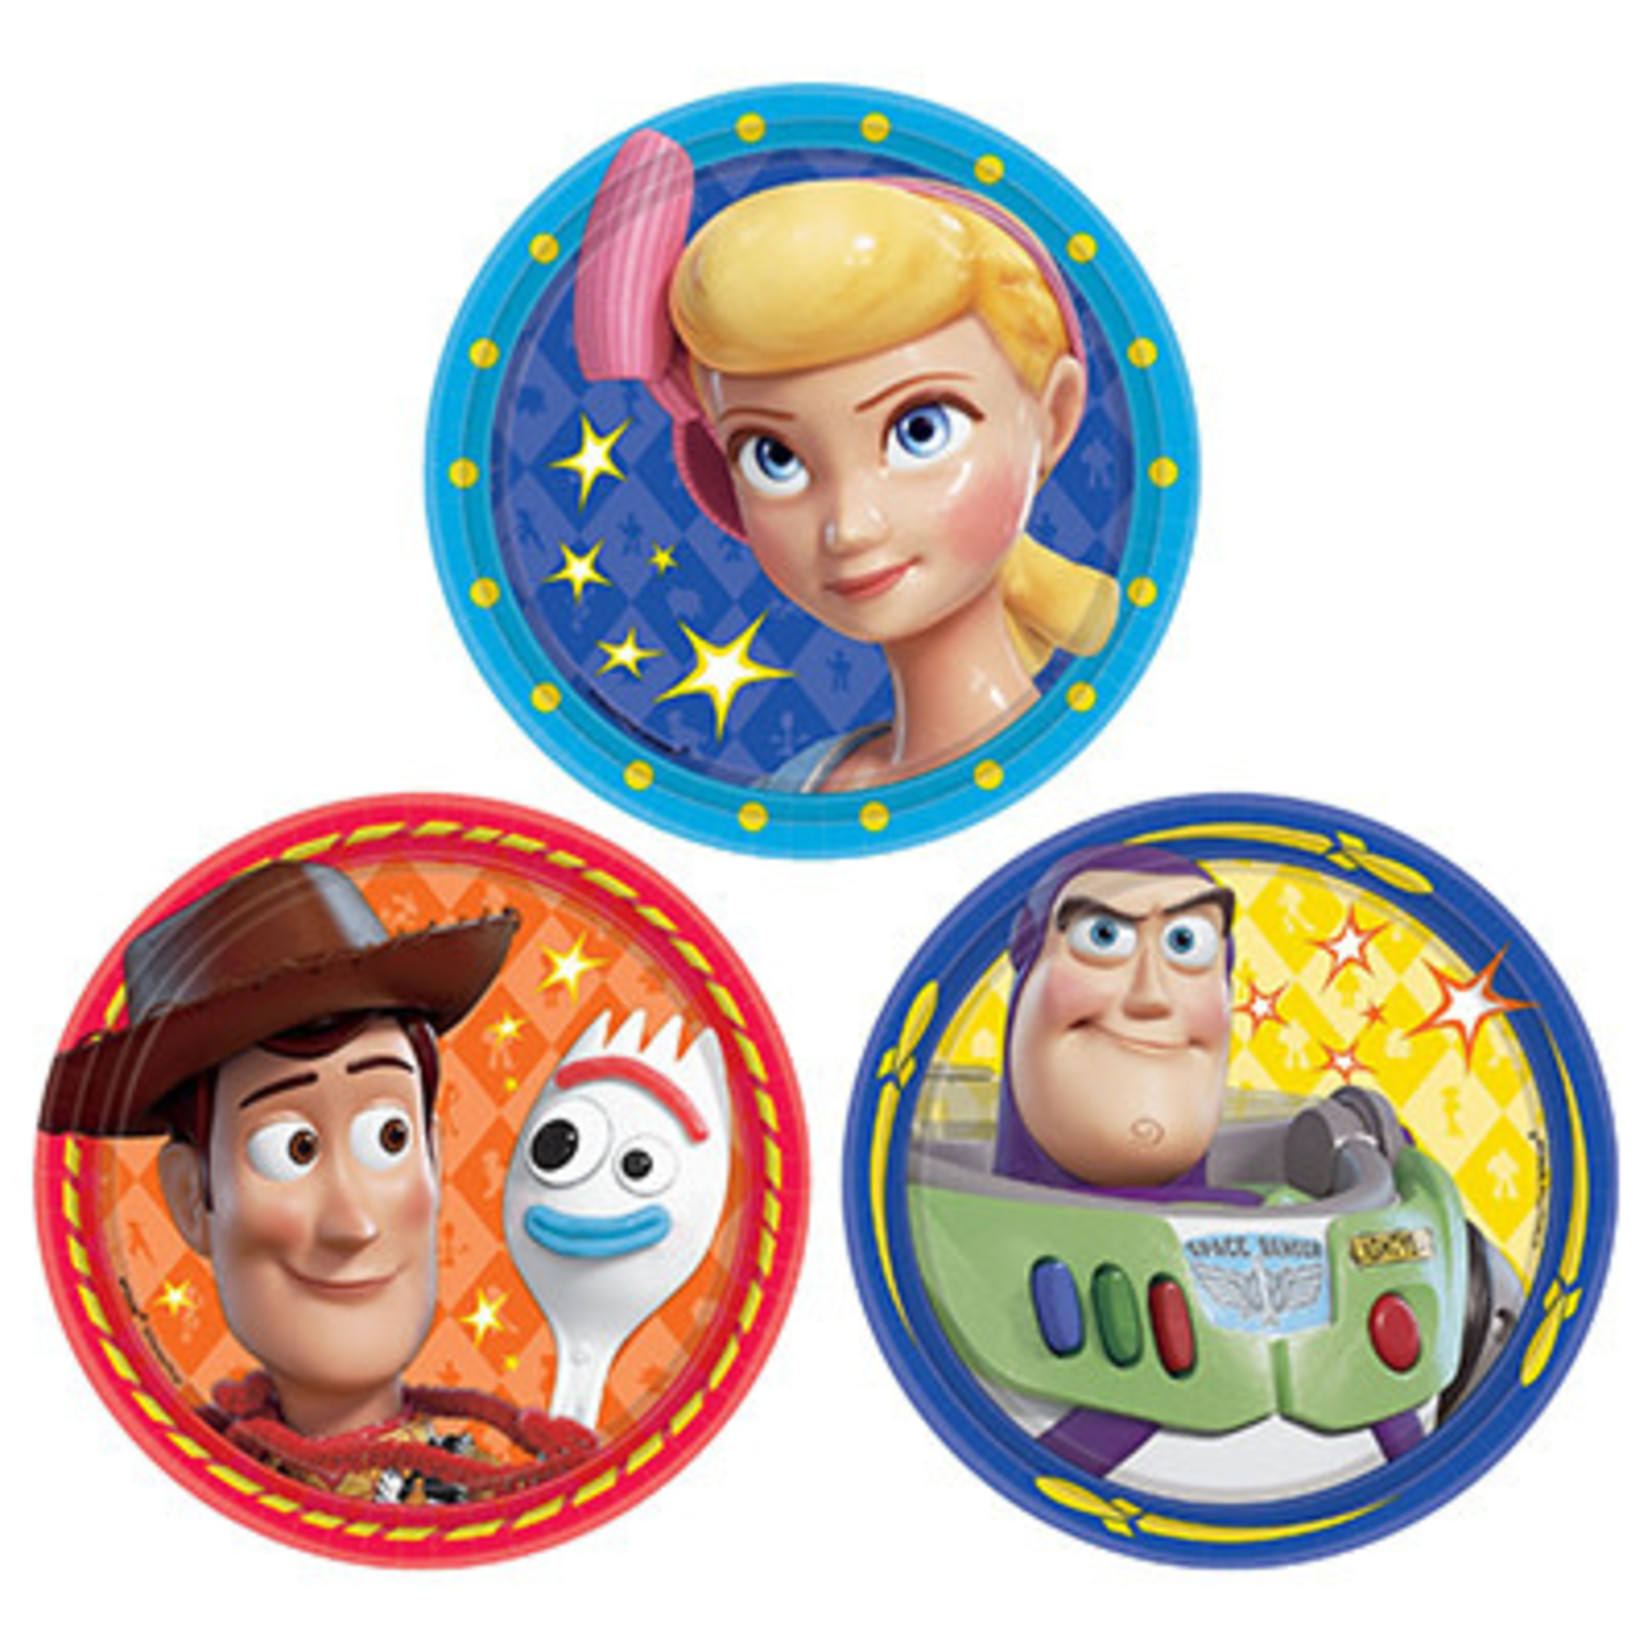 Amscan Toy Story 4 7" Plates - 8ct.